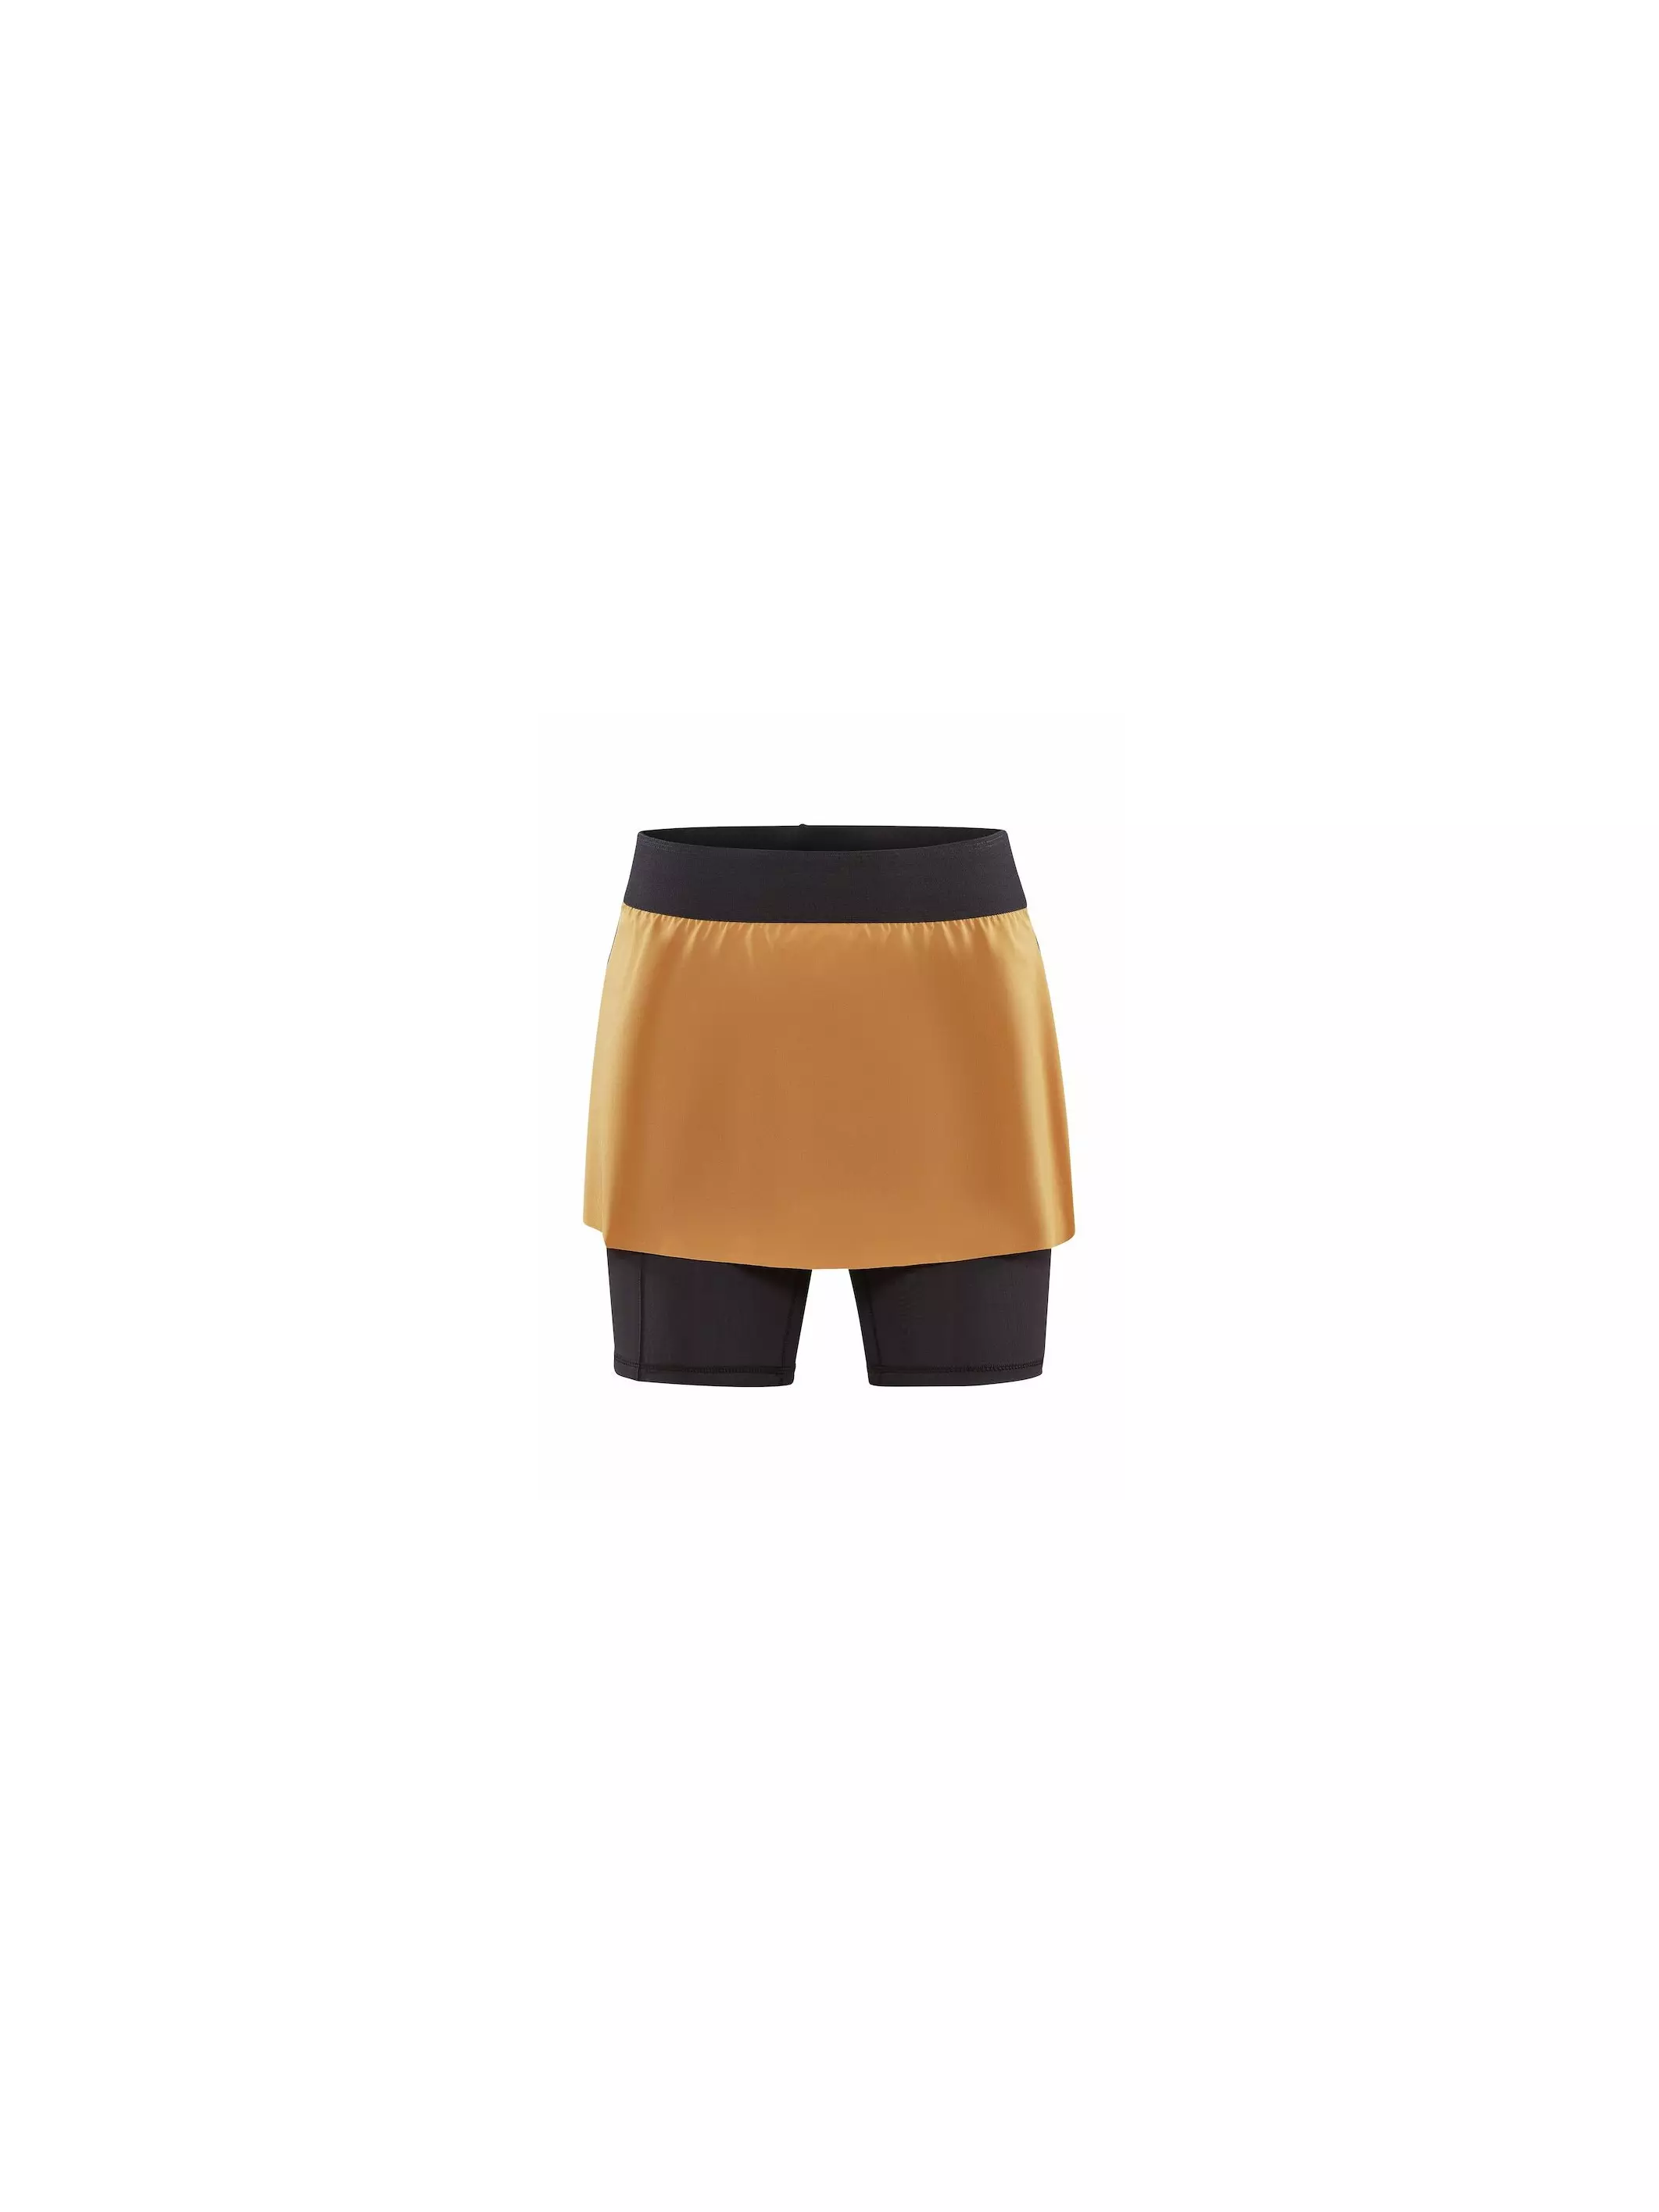 Shorts Craft PRO TRAIL 2IN1 SKIRT W - 1912450